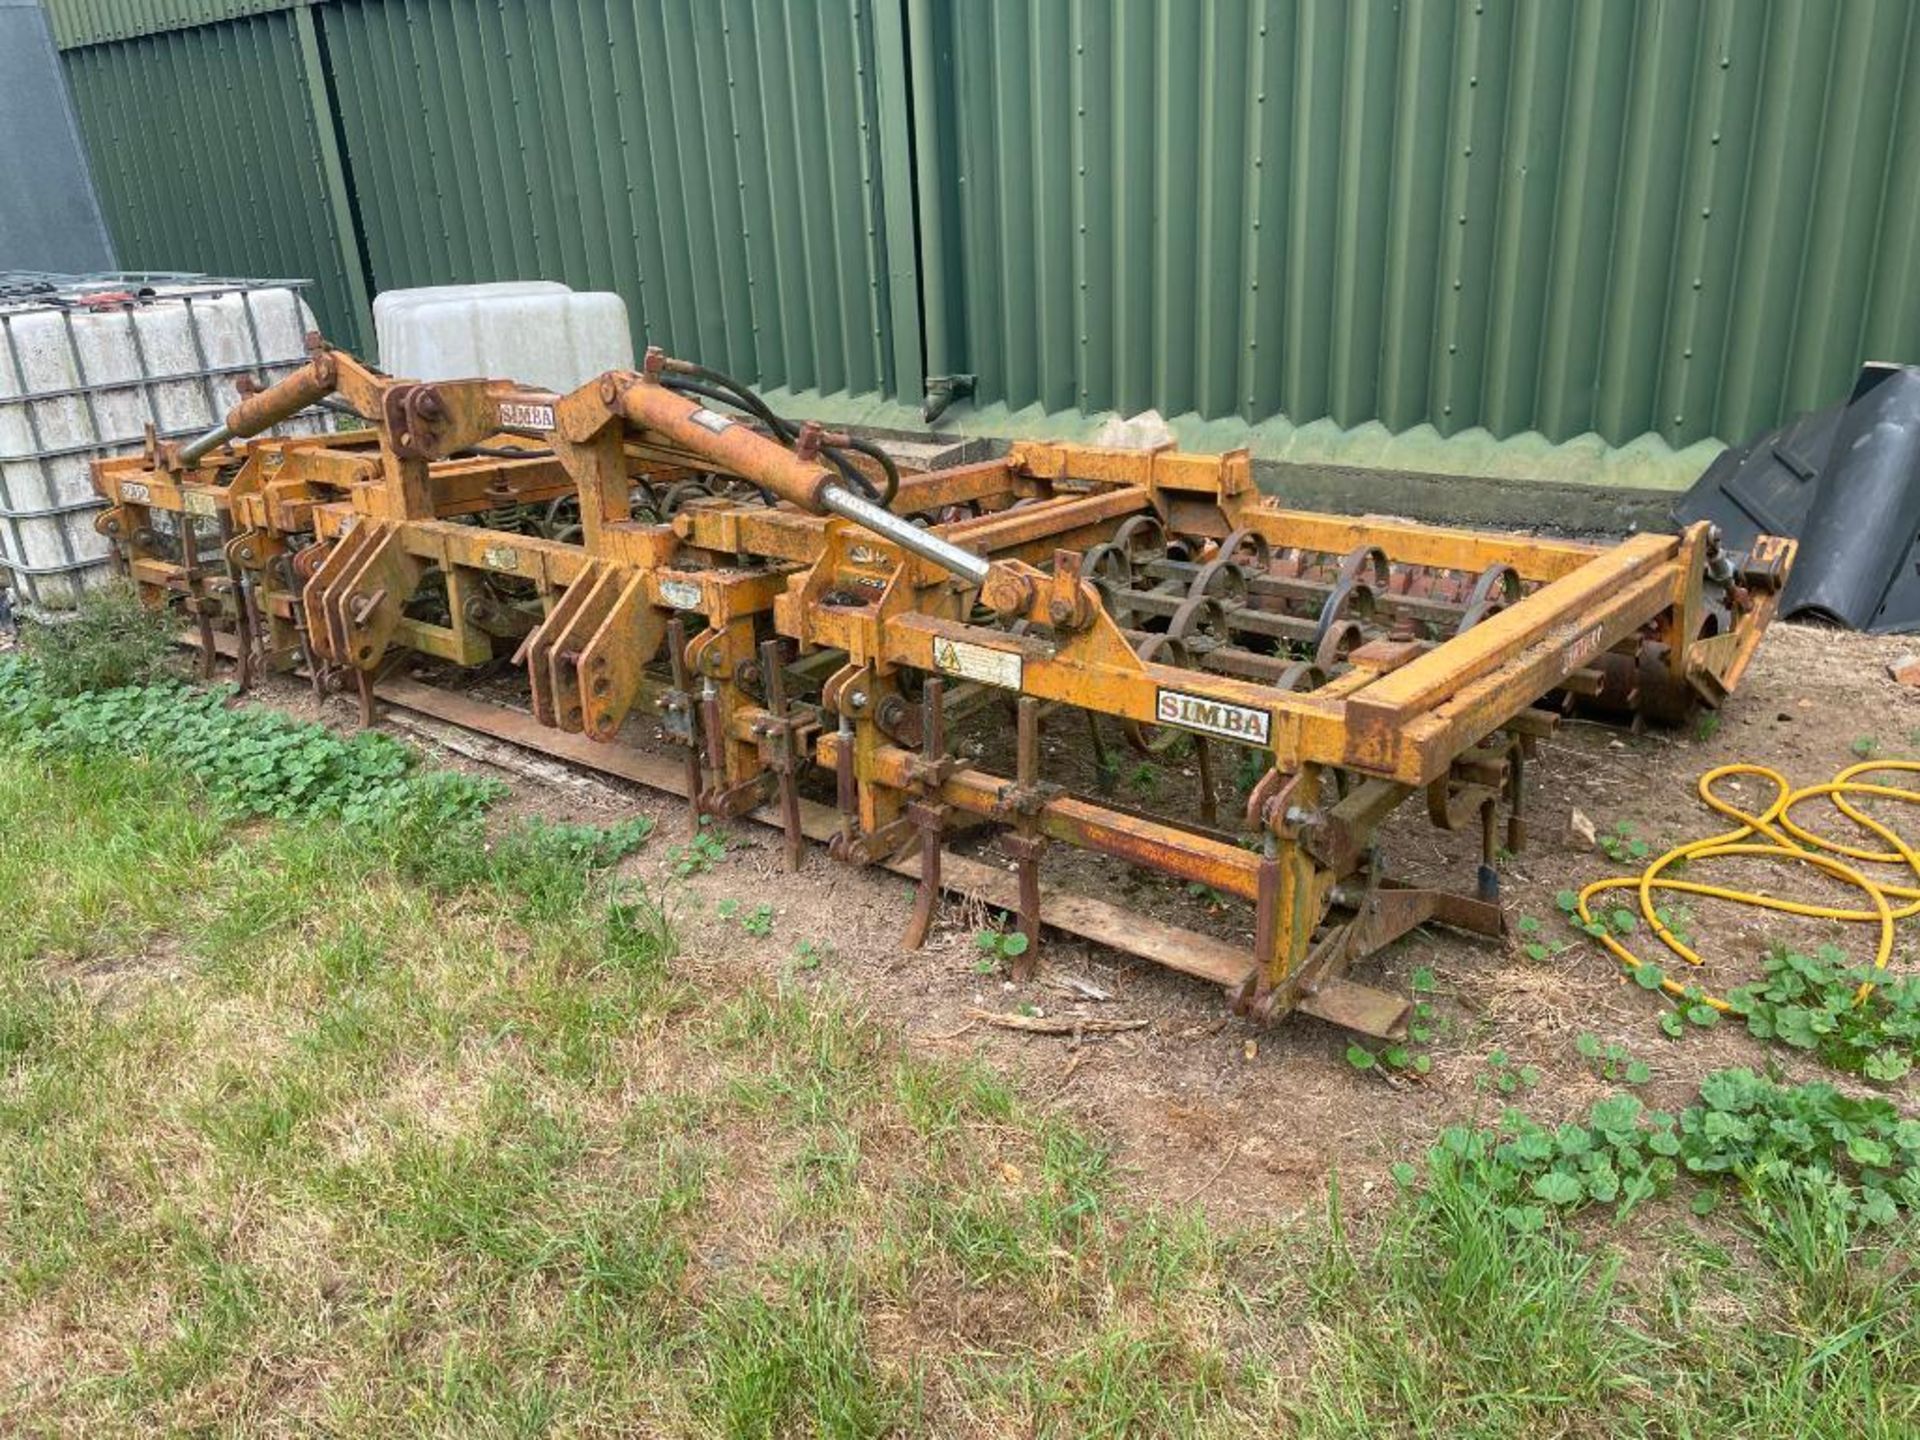 1994 Simba 4.5m springtine cultivator hydraulic folding with front levelling board and rear tooth pa - Image 4 of 6